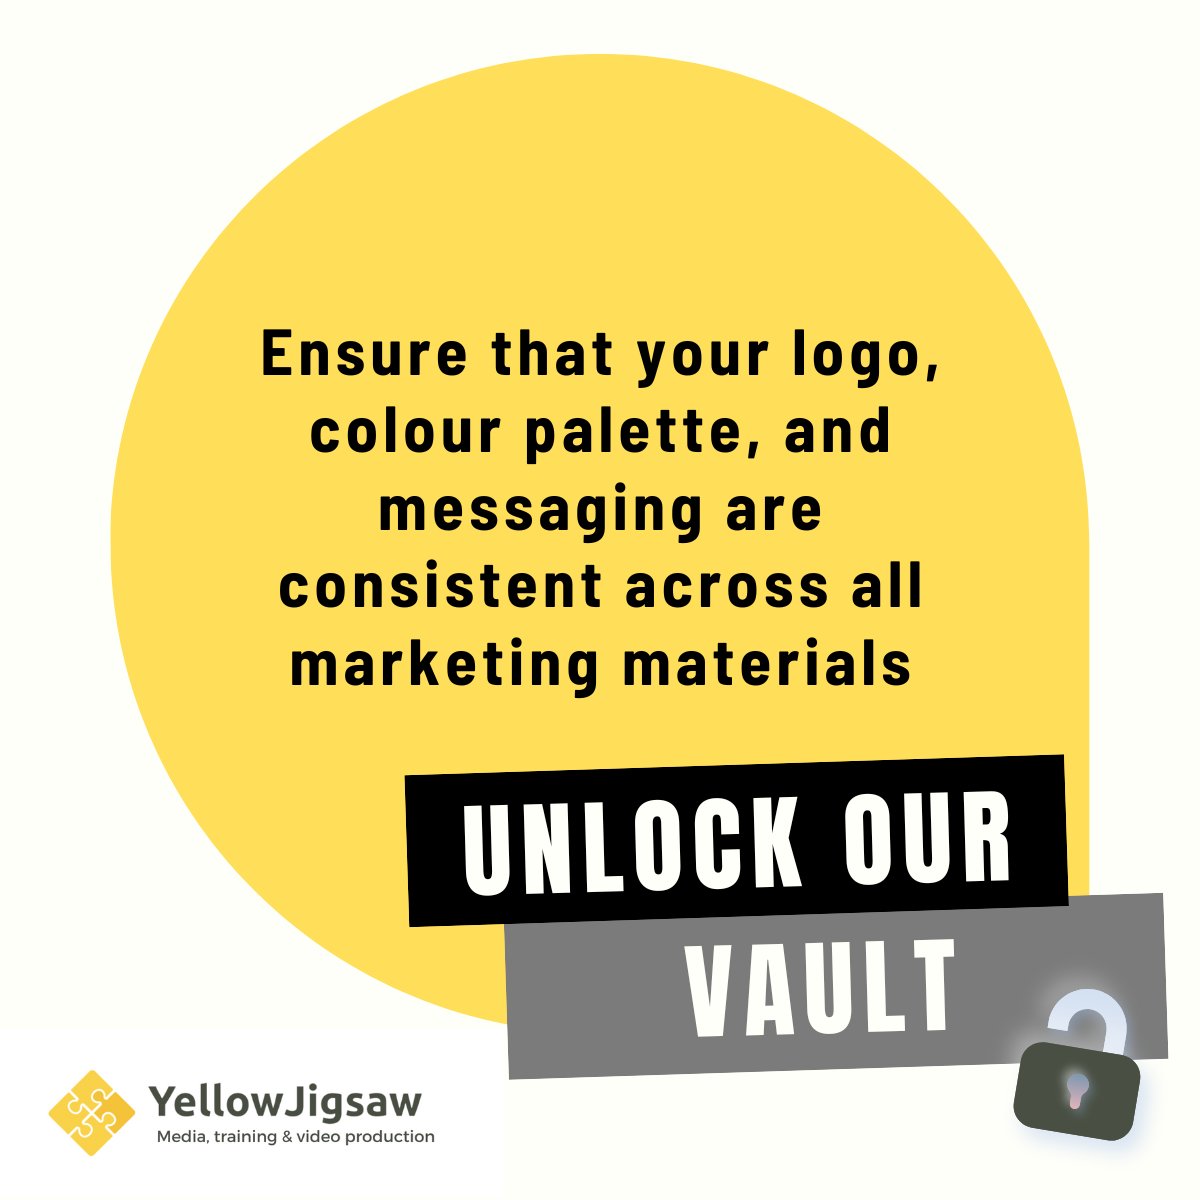 Easily brand on a budget with the right tools. Unlock the secrets to media success with our free expert guides. Start your journey now and ignite your inner media star! 💥 yellowjigsaw.co.uk/vault/